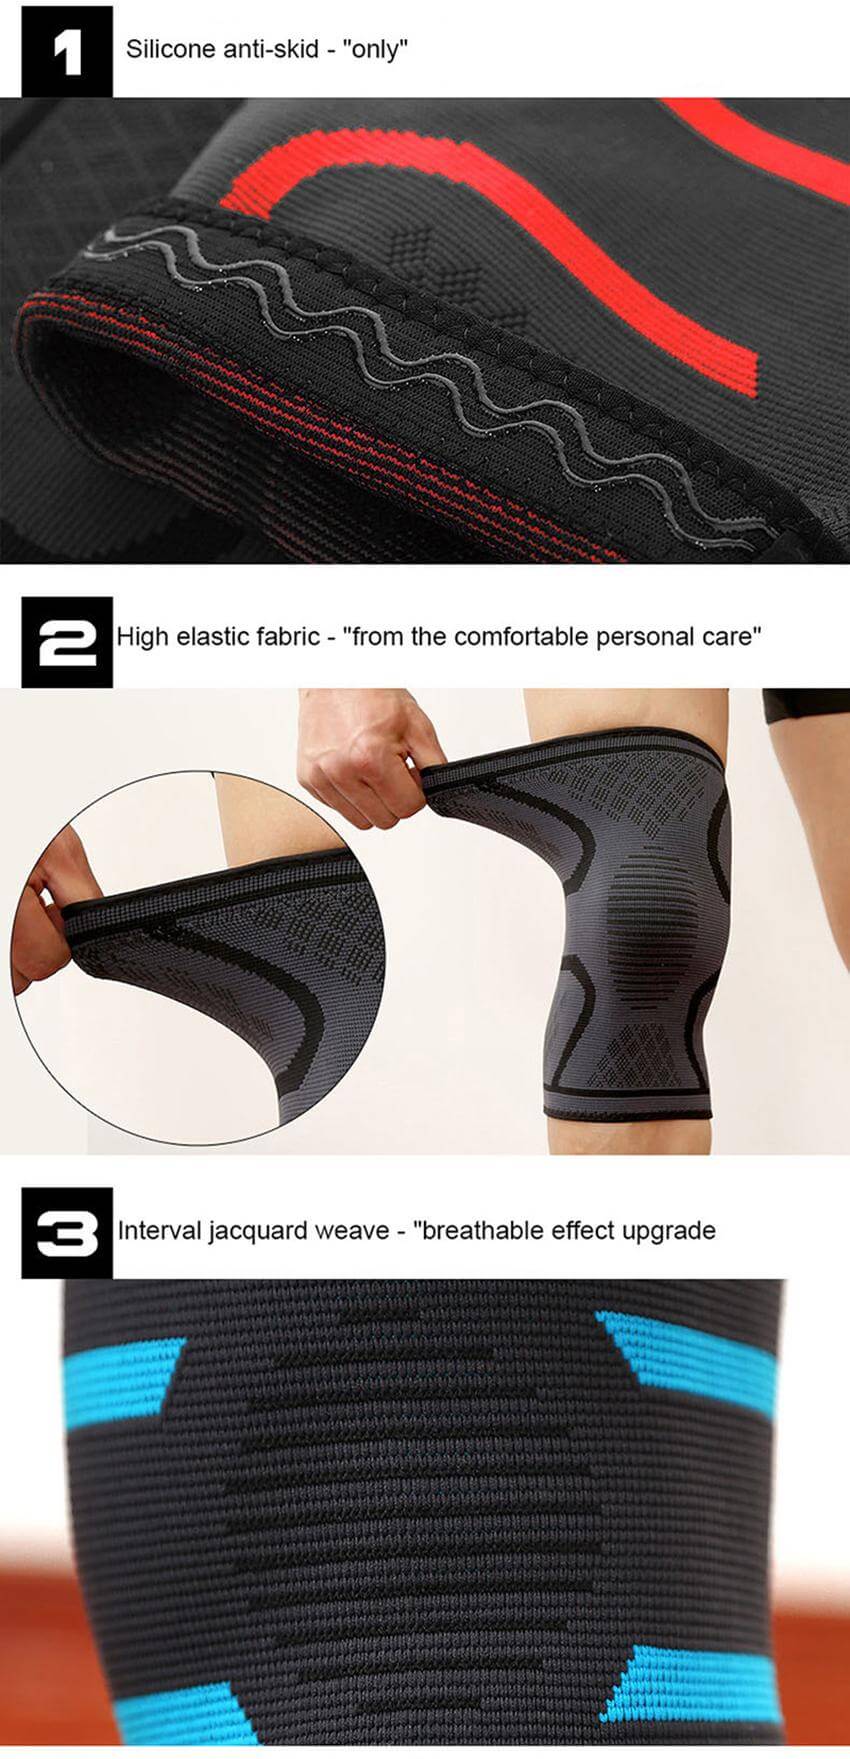 Compression Knee Sleeve Brace Features